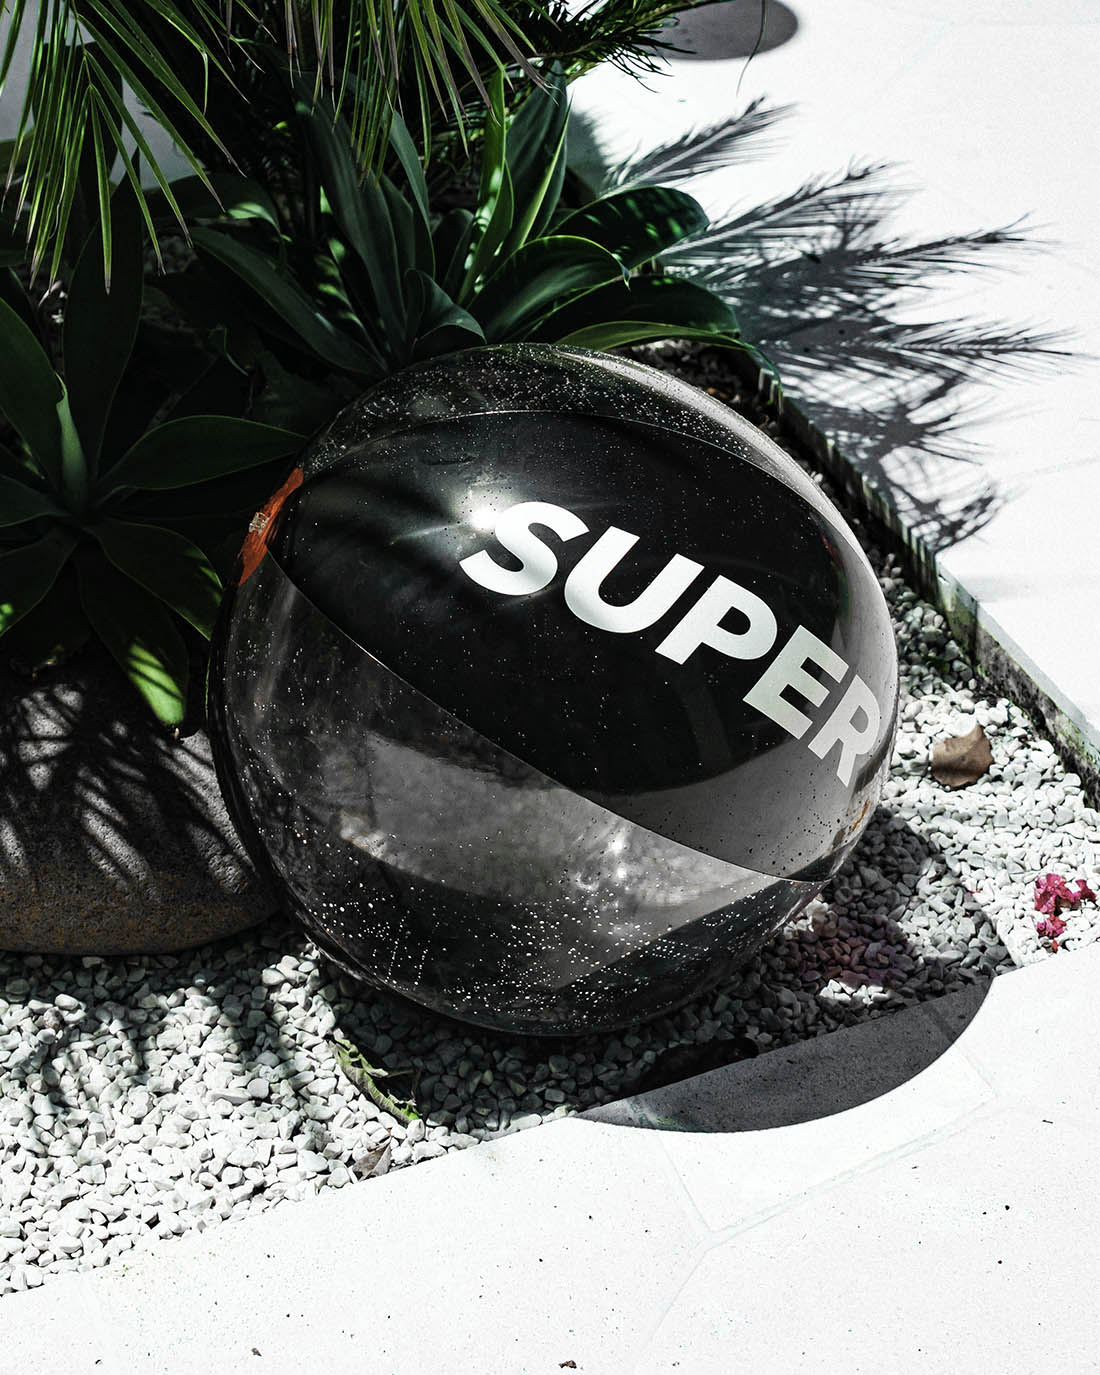 Beach ball with solid black and clear design.